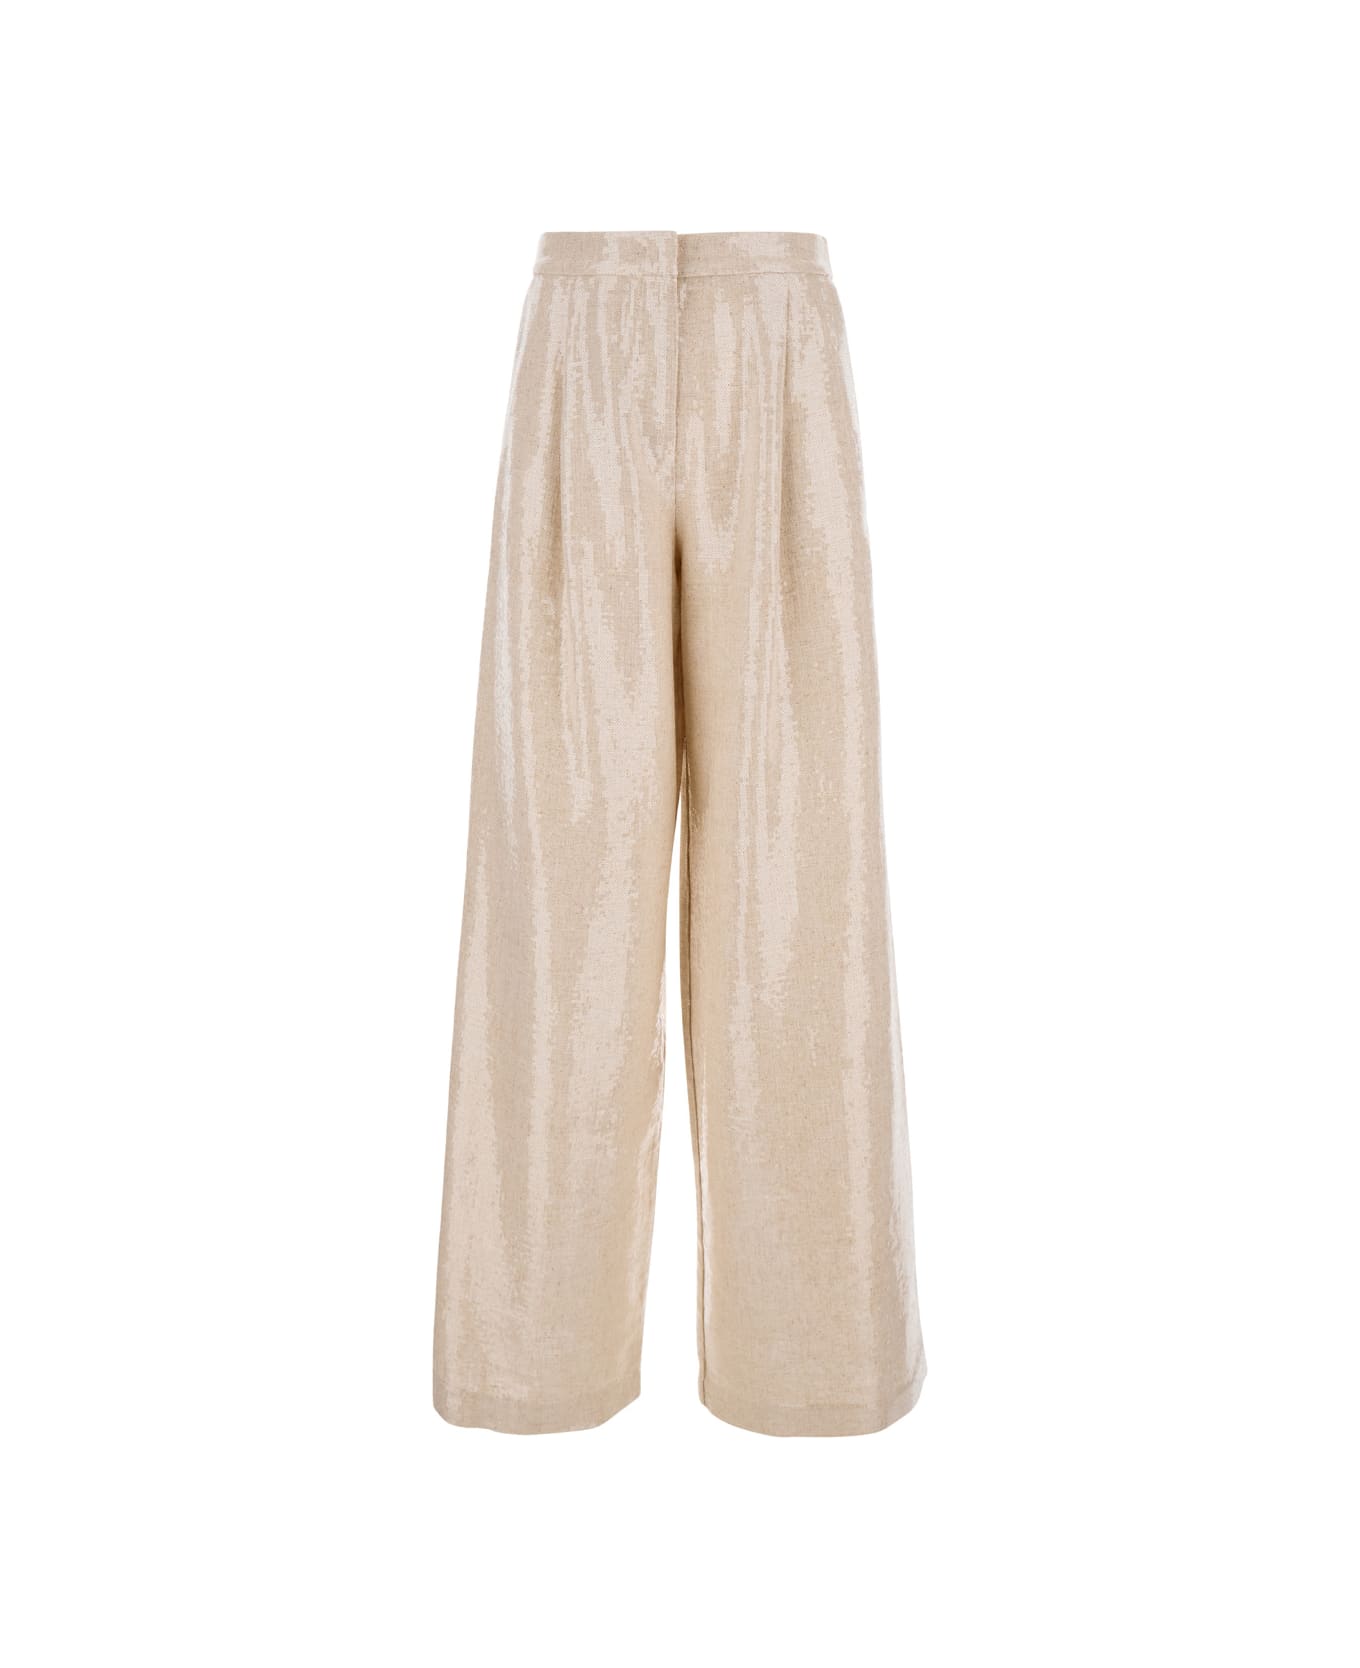 Federica Tosi Paillettes Pants - BAMBOO